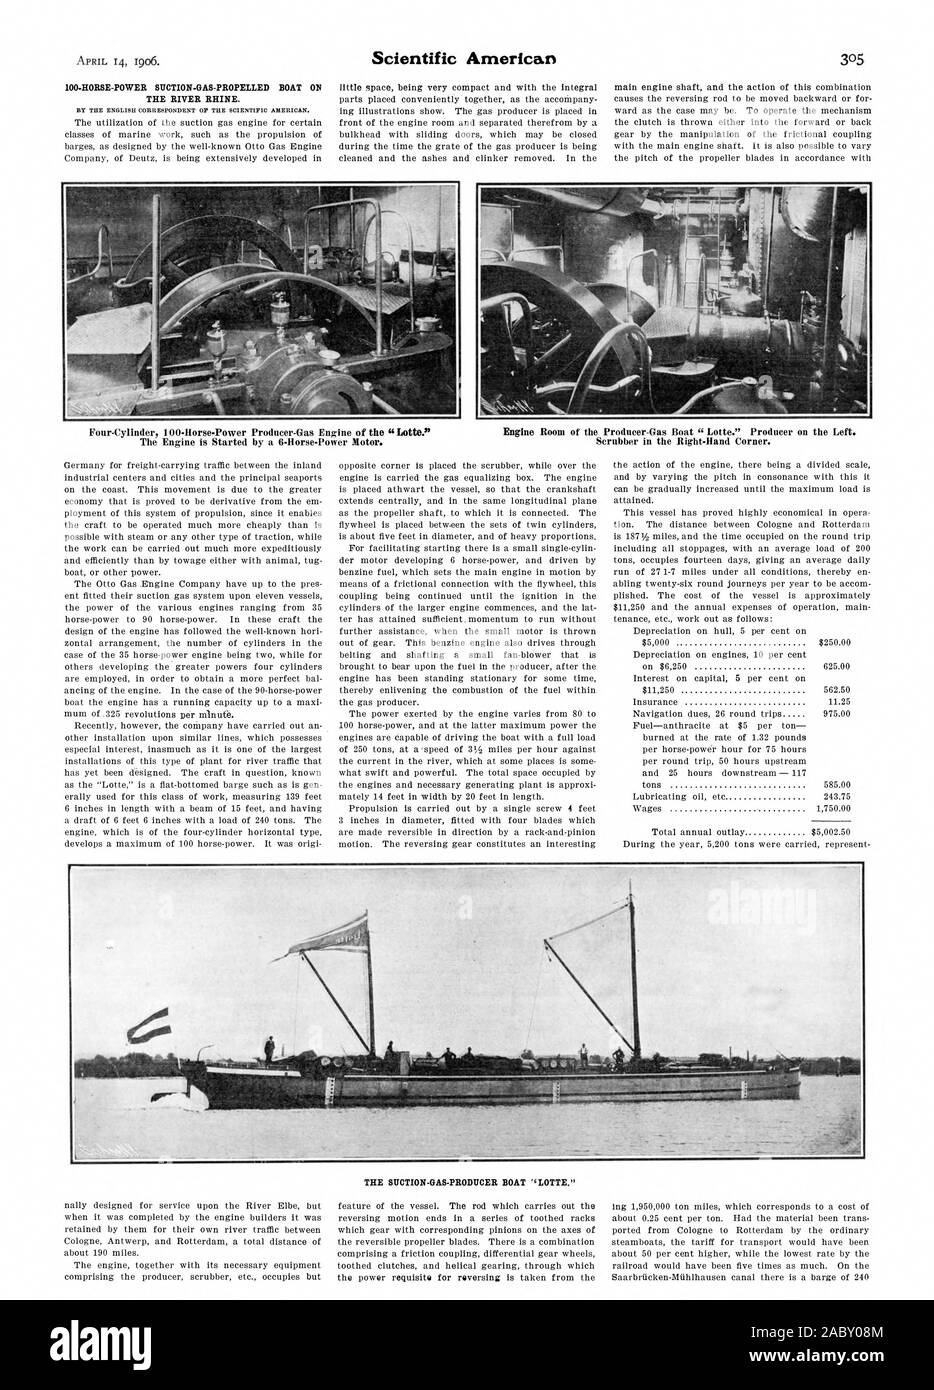 100-HORSE-POWER SUCTION-GAS-PROPELLED BOAT ON THE RIVER RHINE., scientific american, 1906-04-14 Stock Photo